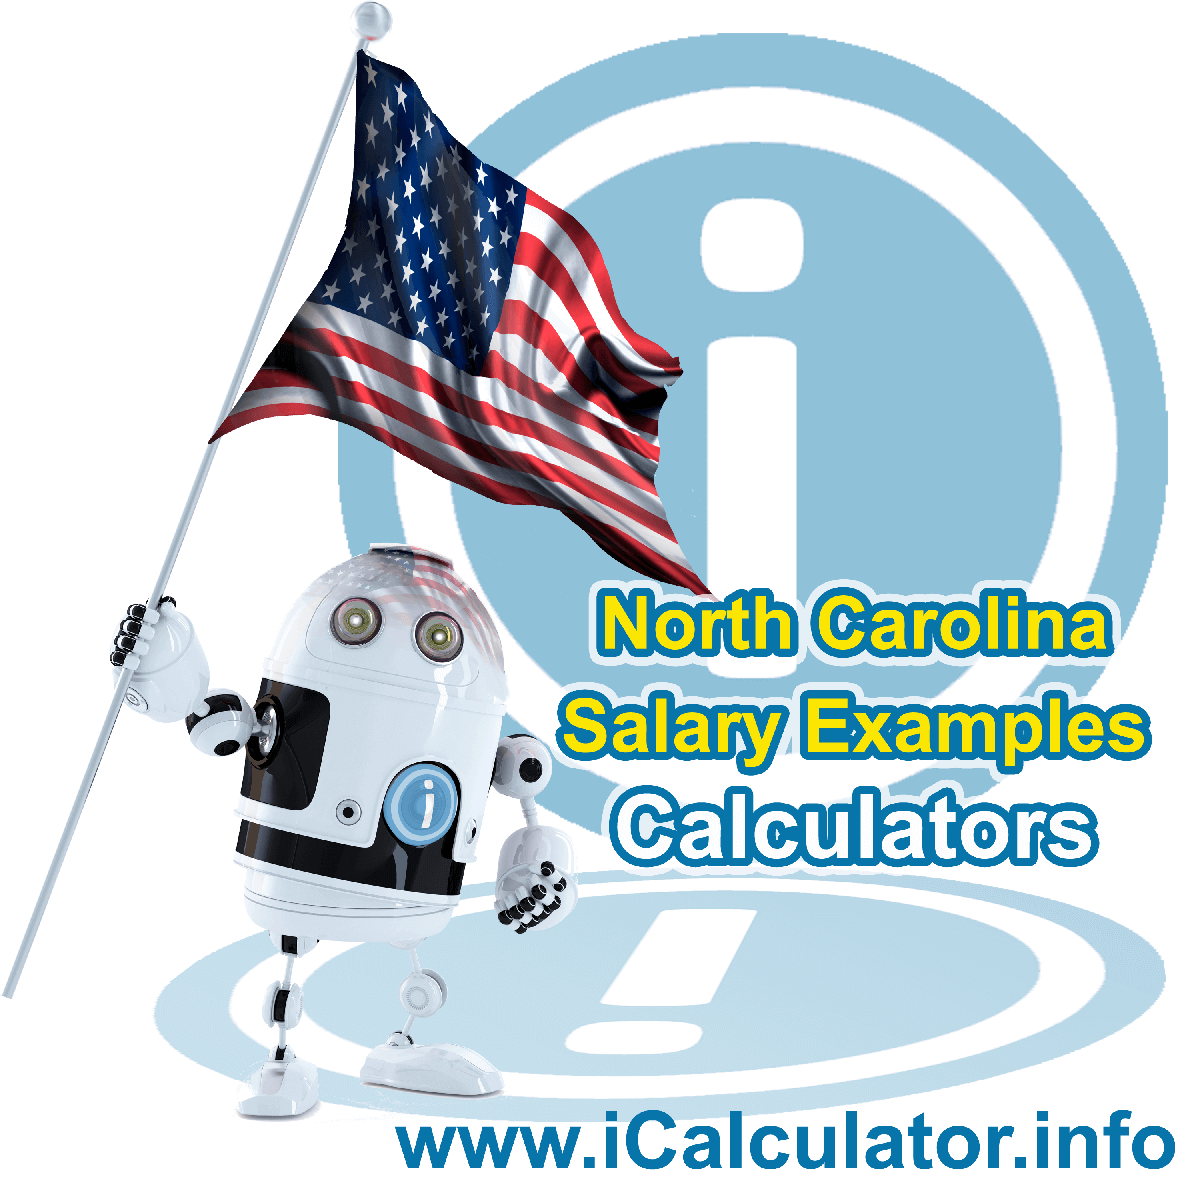 North Carolina Salary Example for $ 185,000.00 in 2023 | iCalculator™ | $ 185,000.00 salary example for employee and employer paying North Carolina State tincome taxes. Detailed salary after tax calculation including North Carolina State Tax, Federal State Tax, Medicare Deductions, Social Security, Capital Gains and other income tax and salary deductions complete with supporting North Carolina state tax tables 